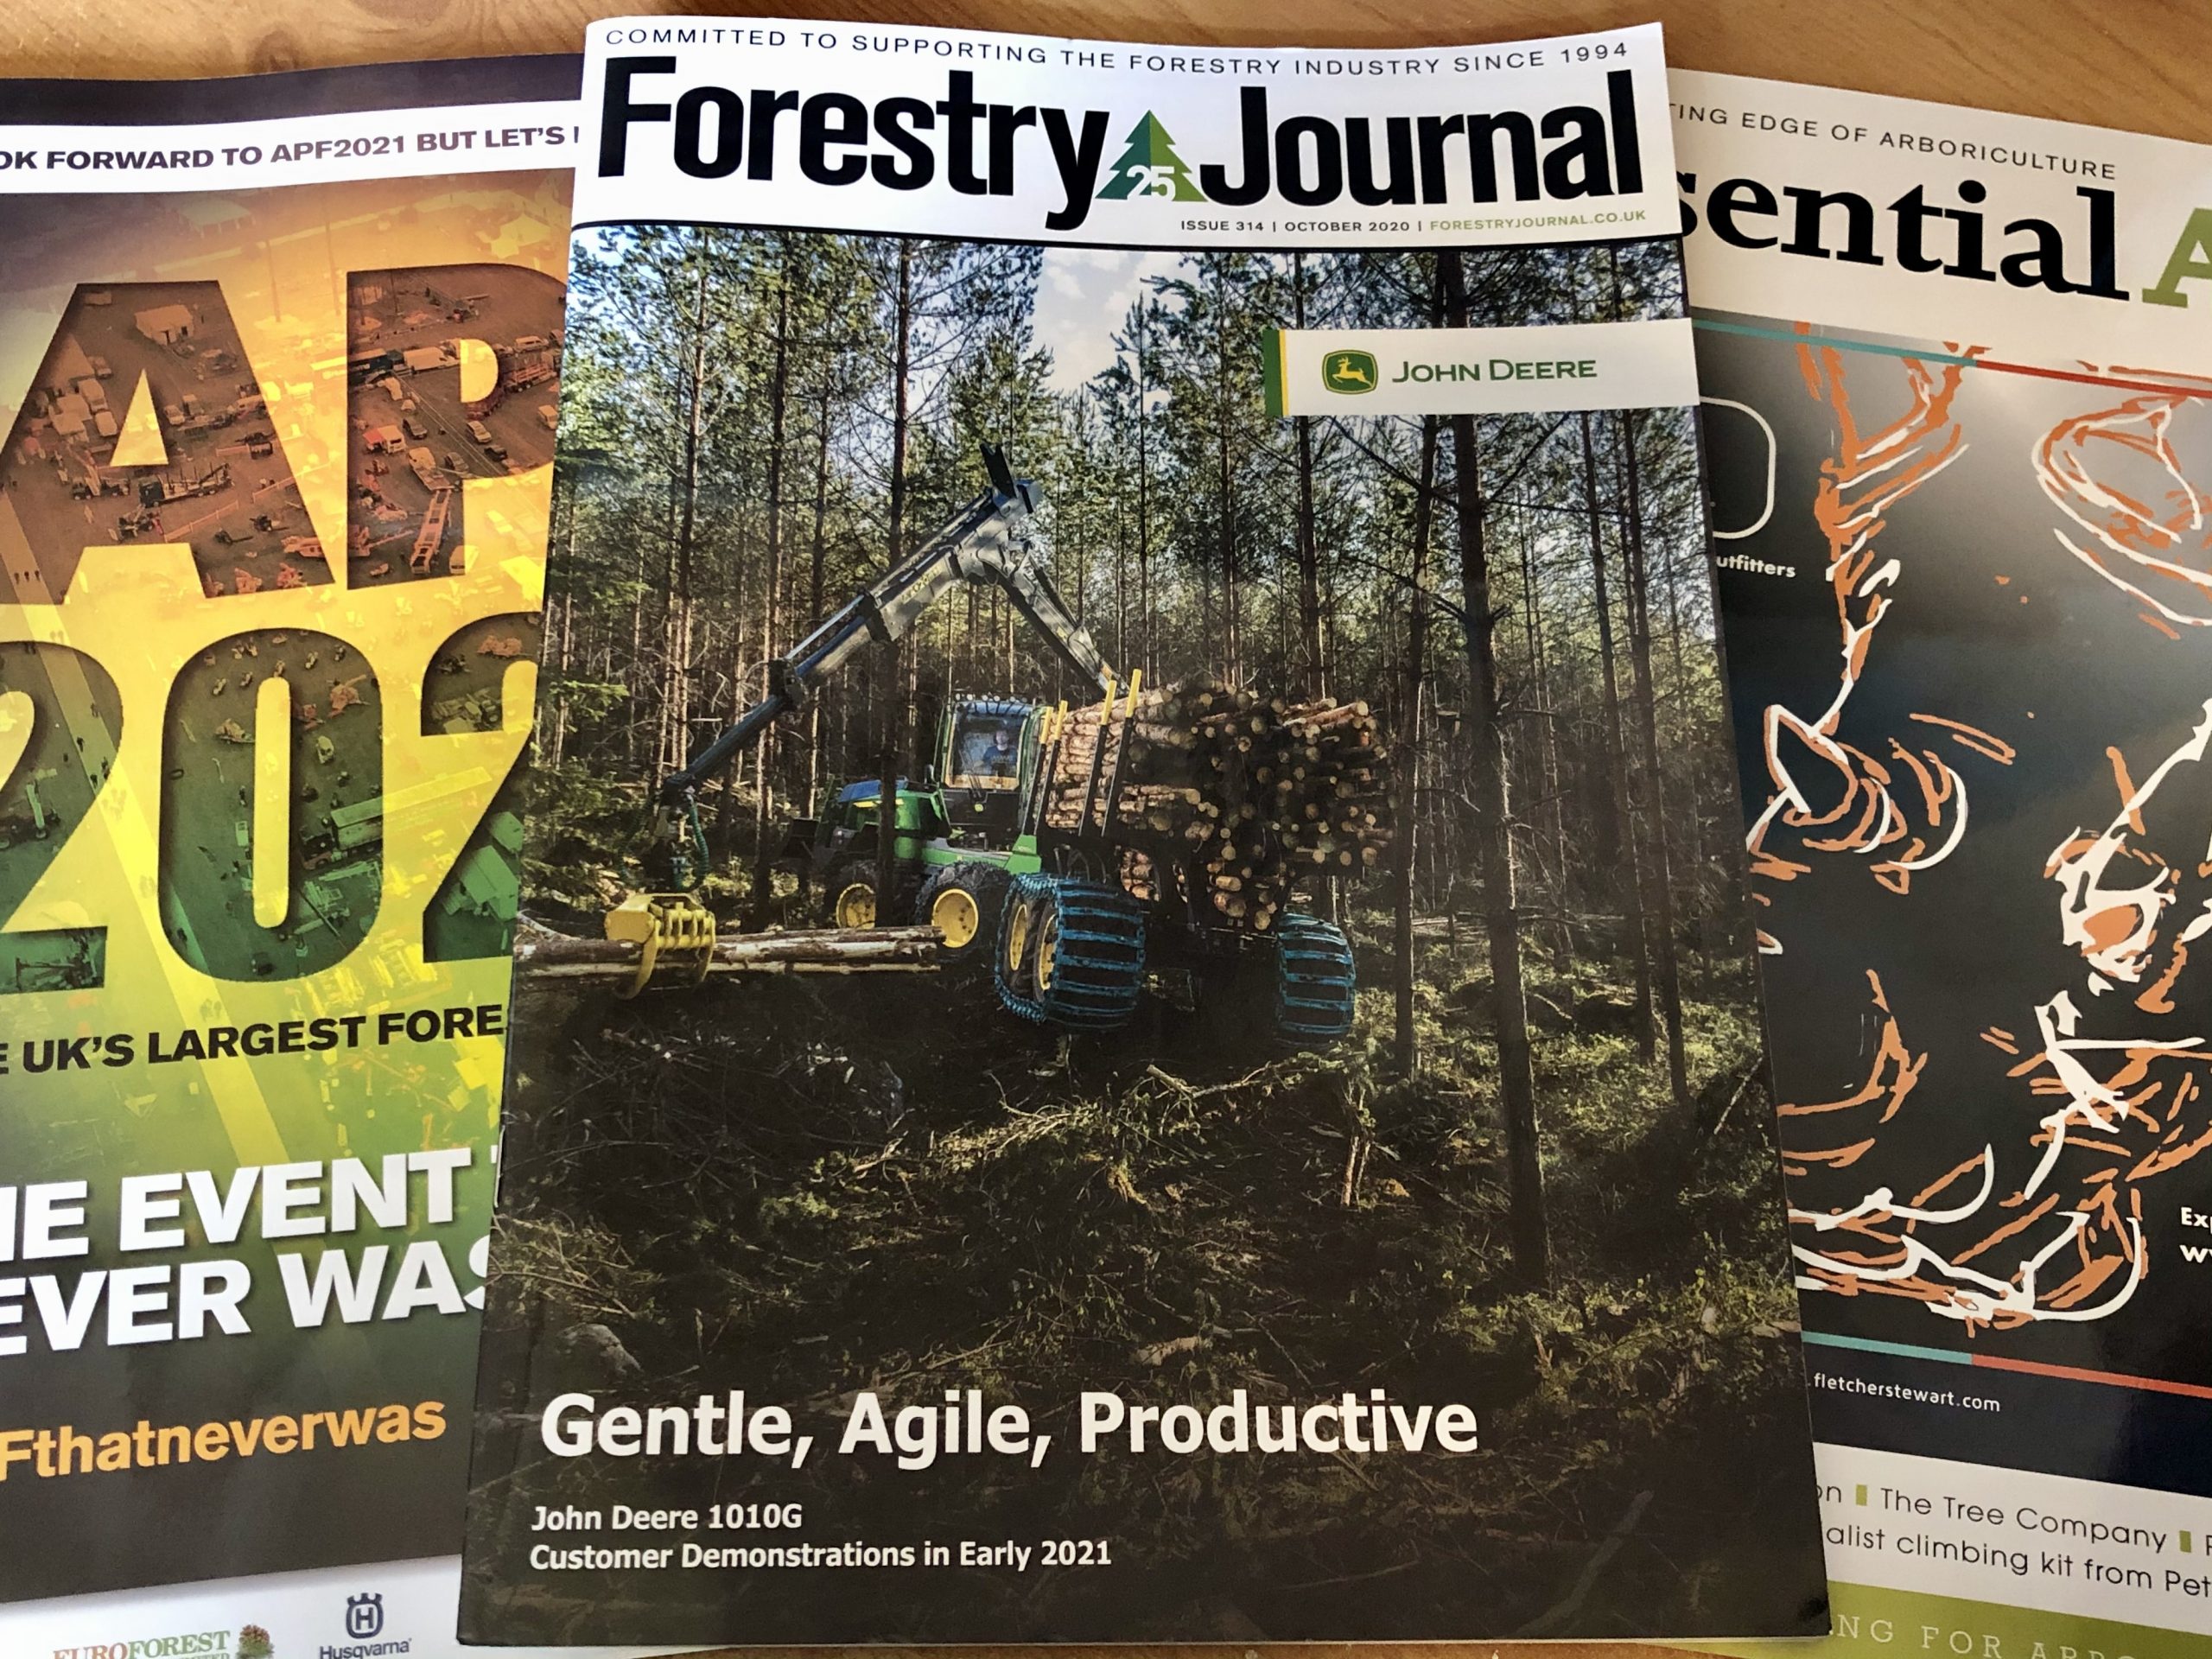 Forestry Journal, October 2020 – Bandit SG-40 opening the edition!